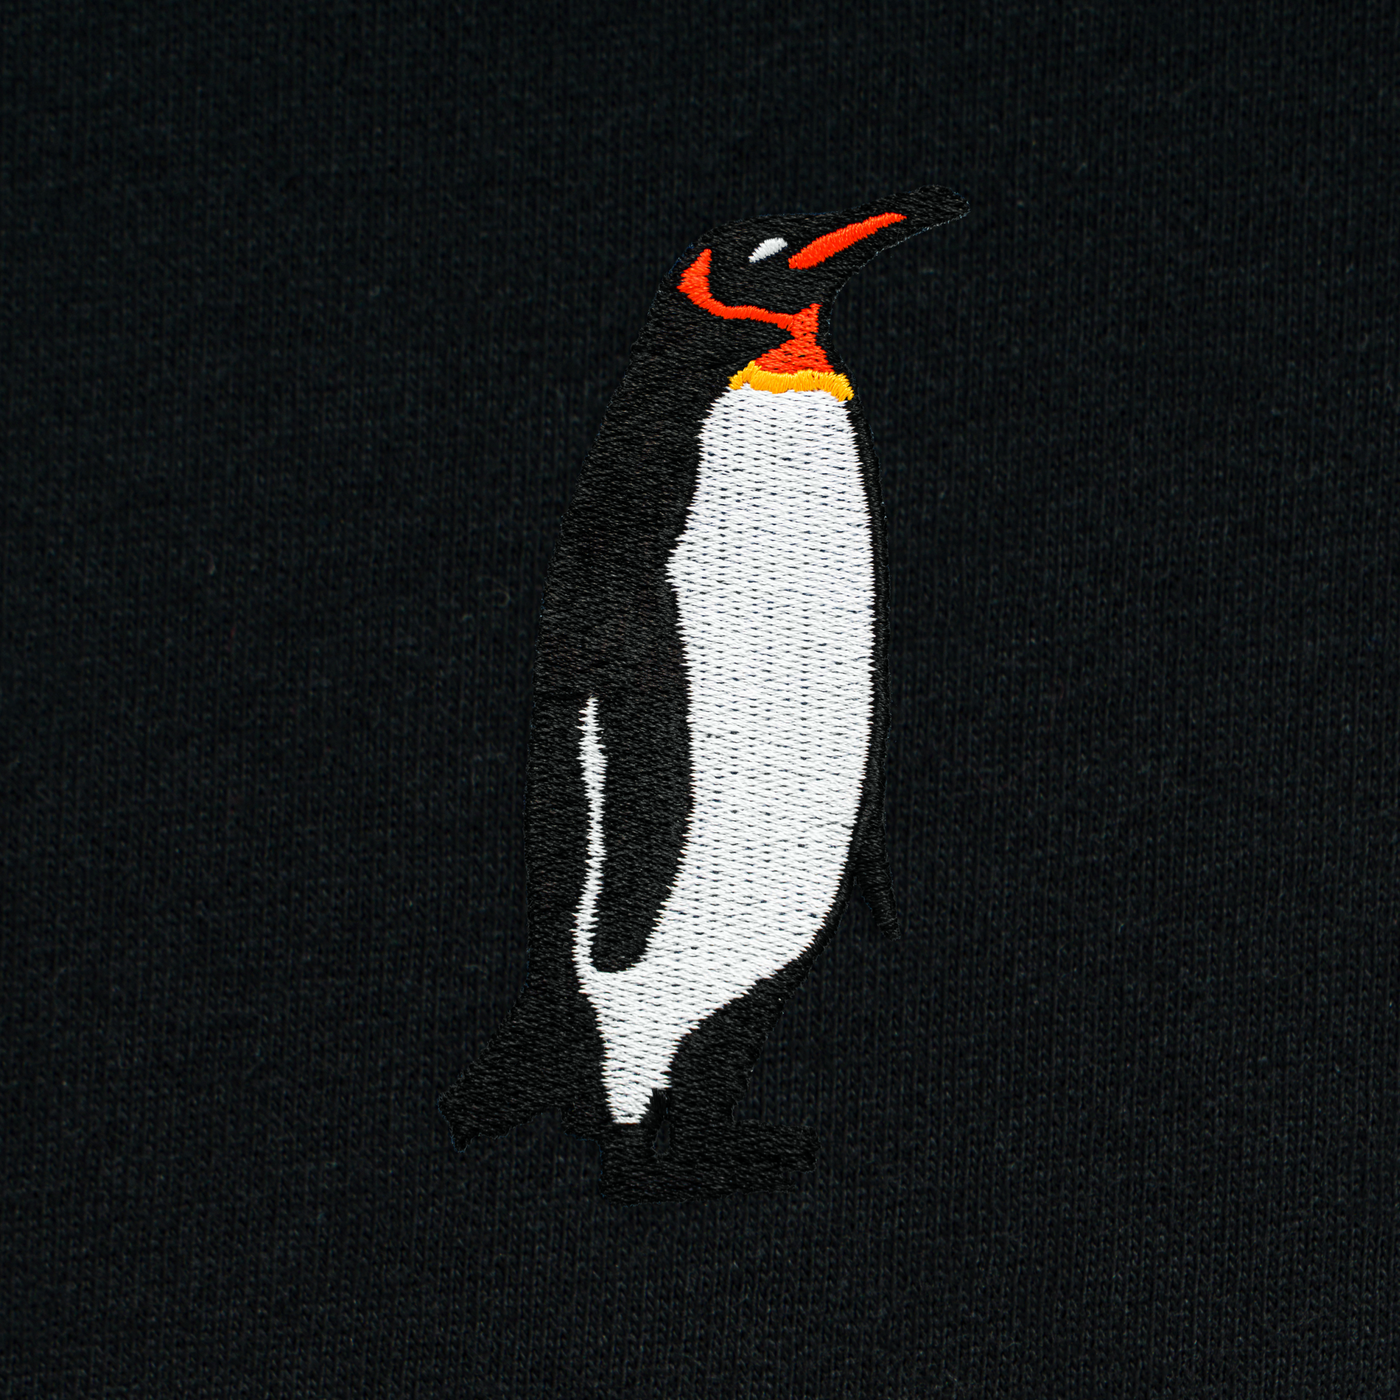 Bobby's Planet Kids Embroidered Penguin T-Shirt from Arctic Polar Animals Collection in Black Color#color_black